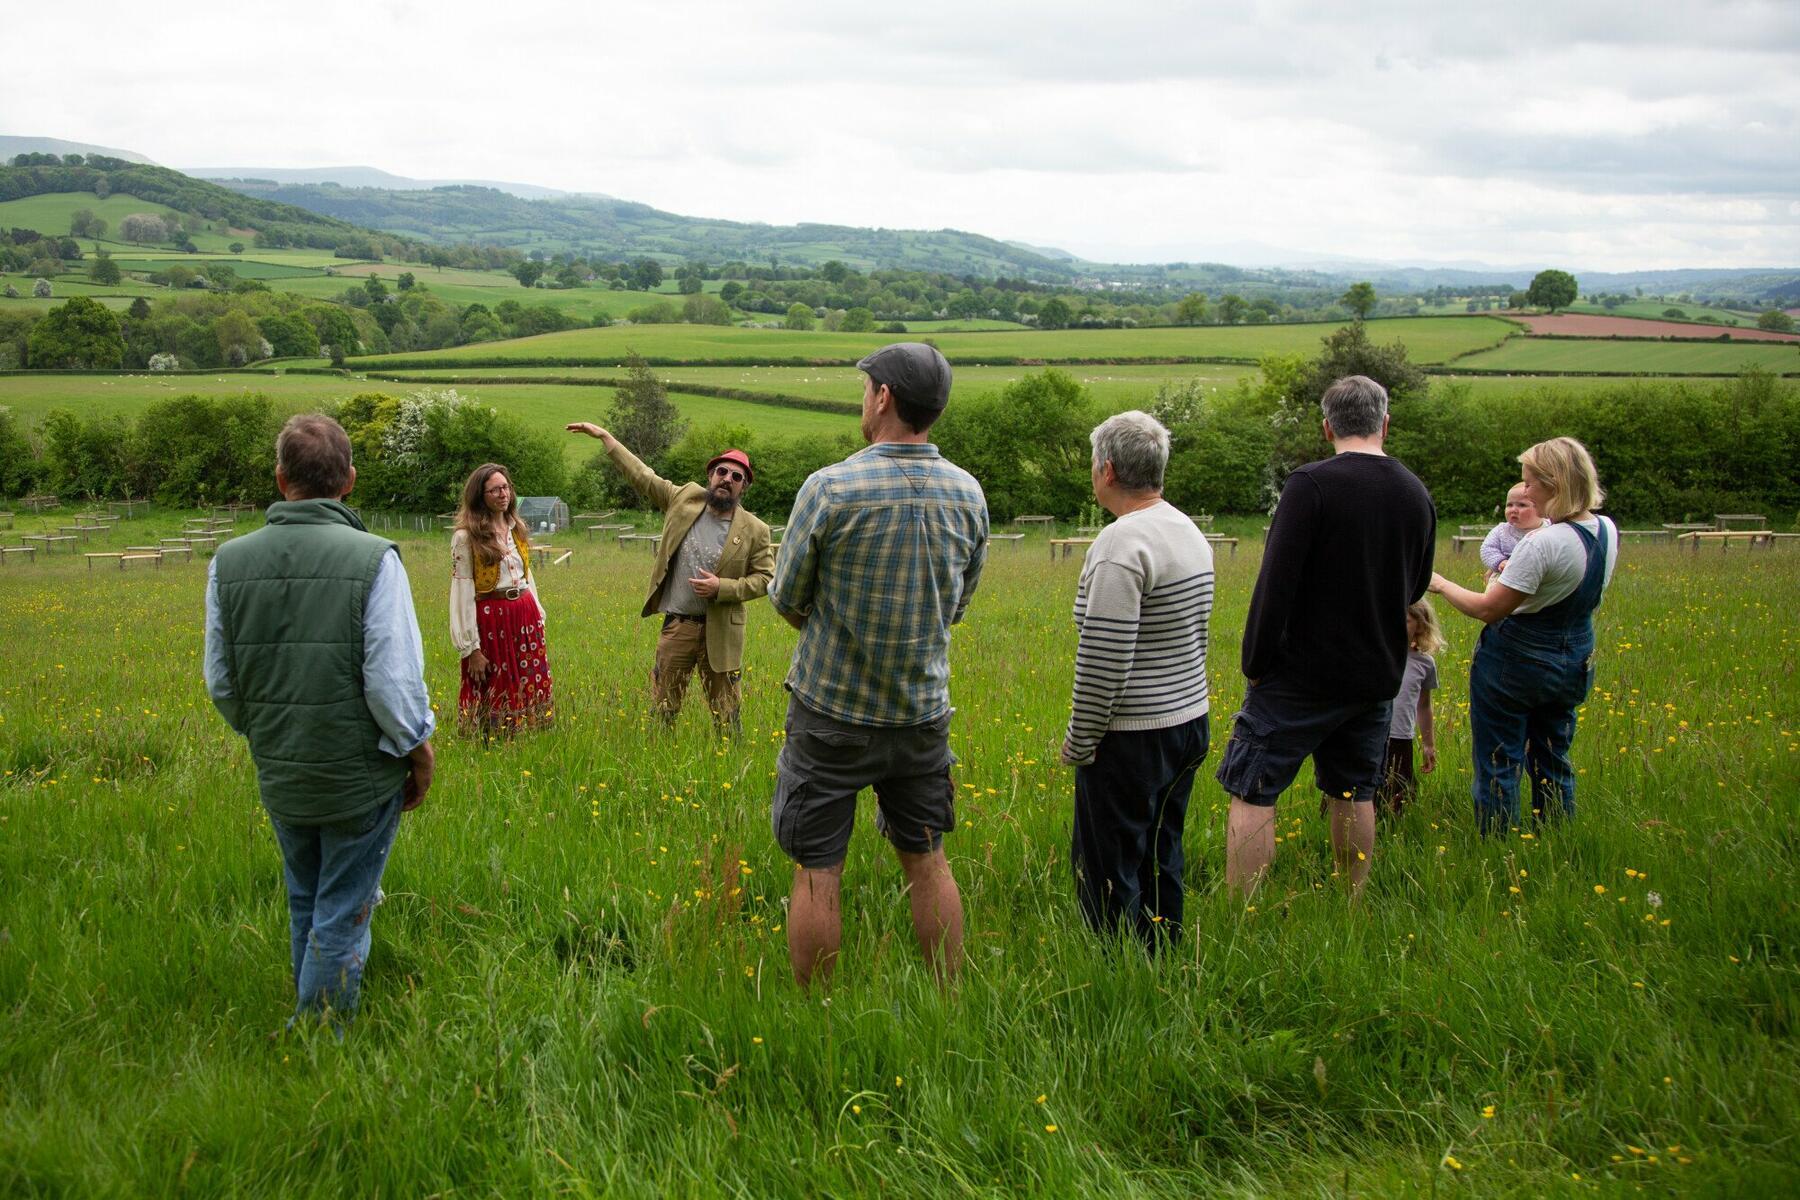 A view of the Black Mountains on our orchard tour